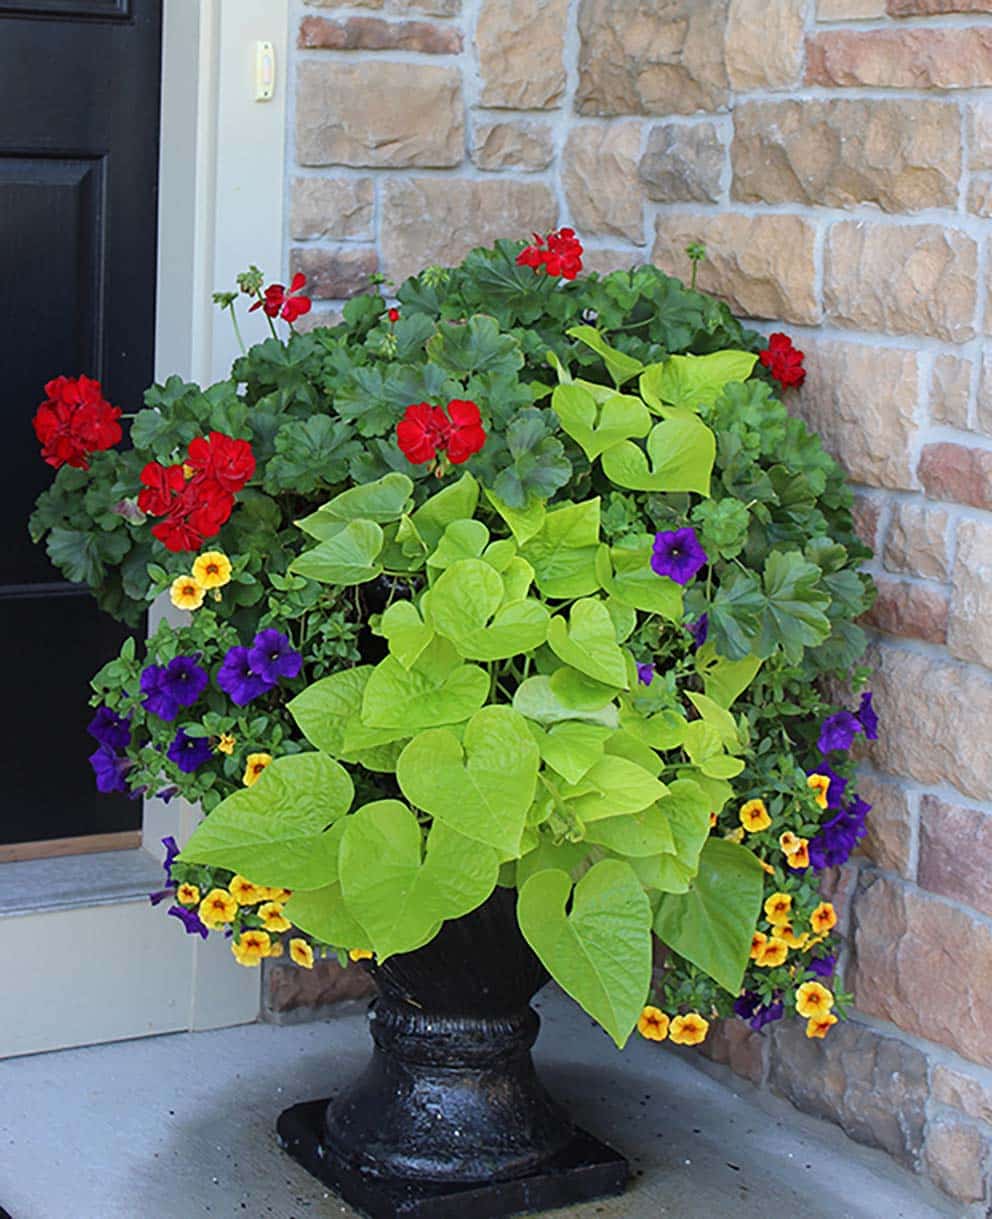 a planter with colorful plants